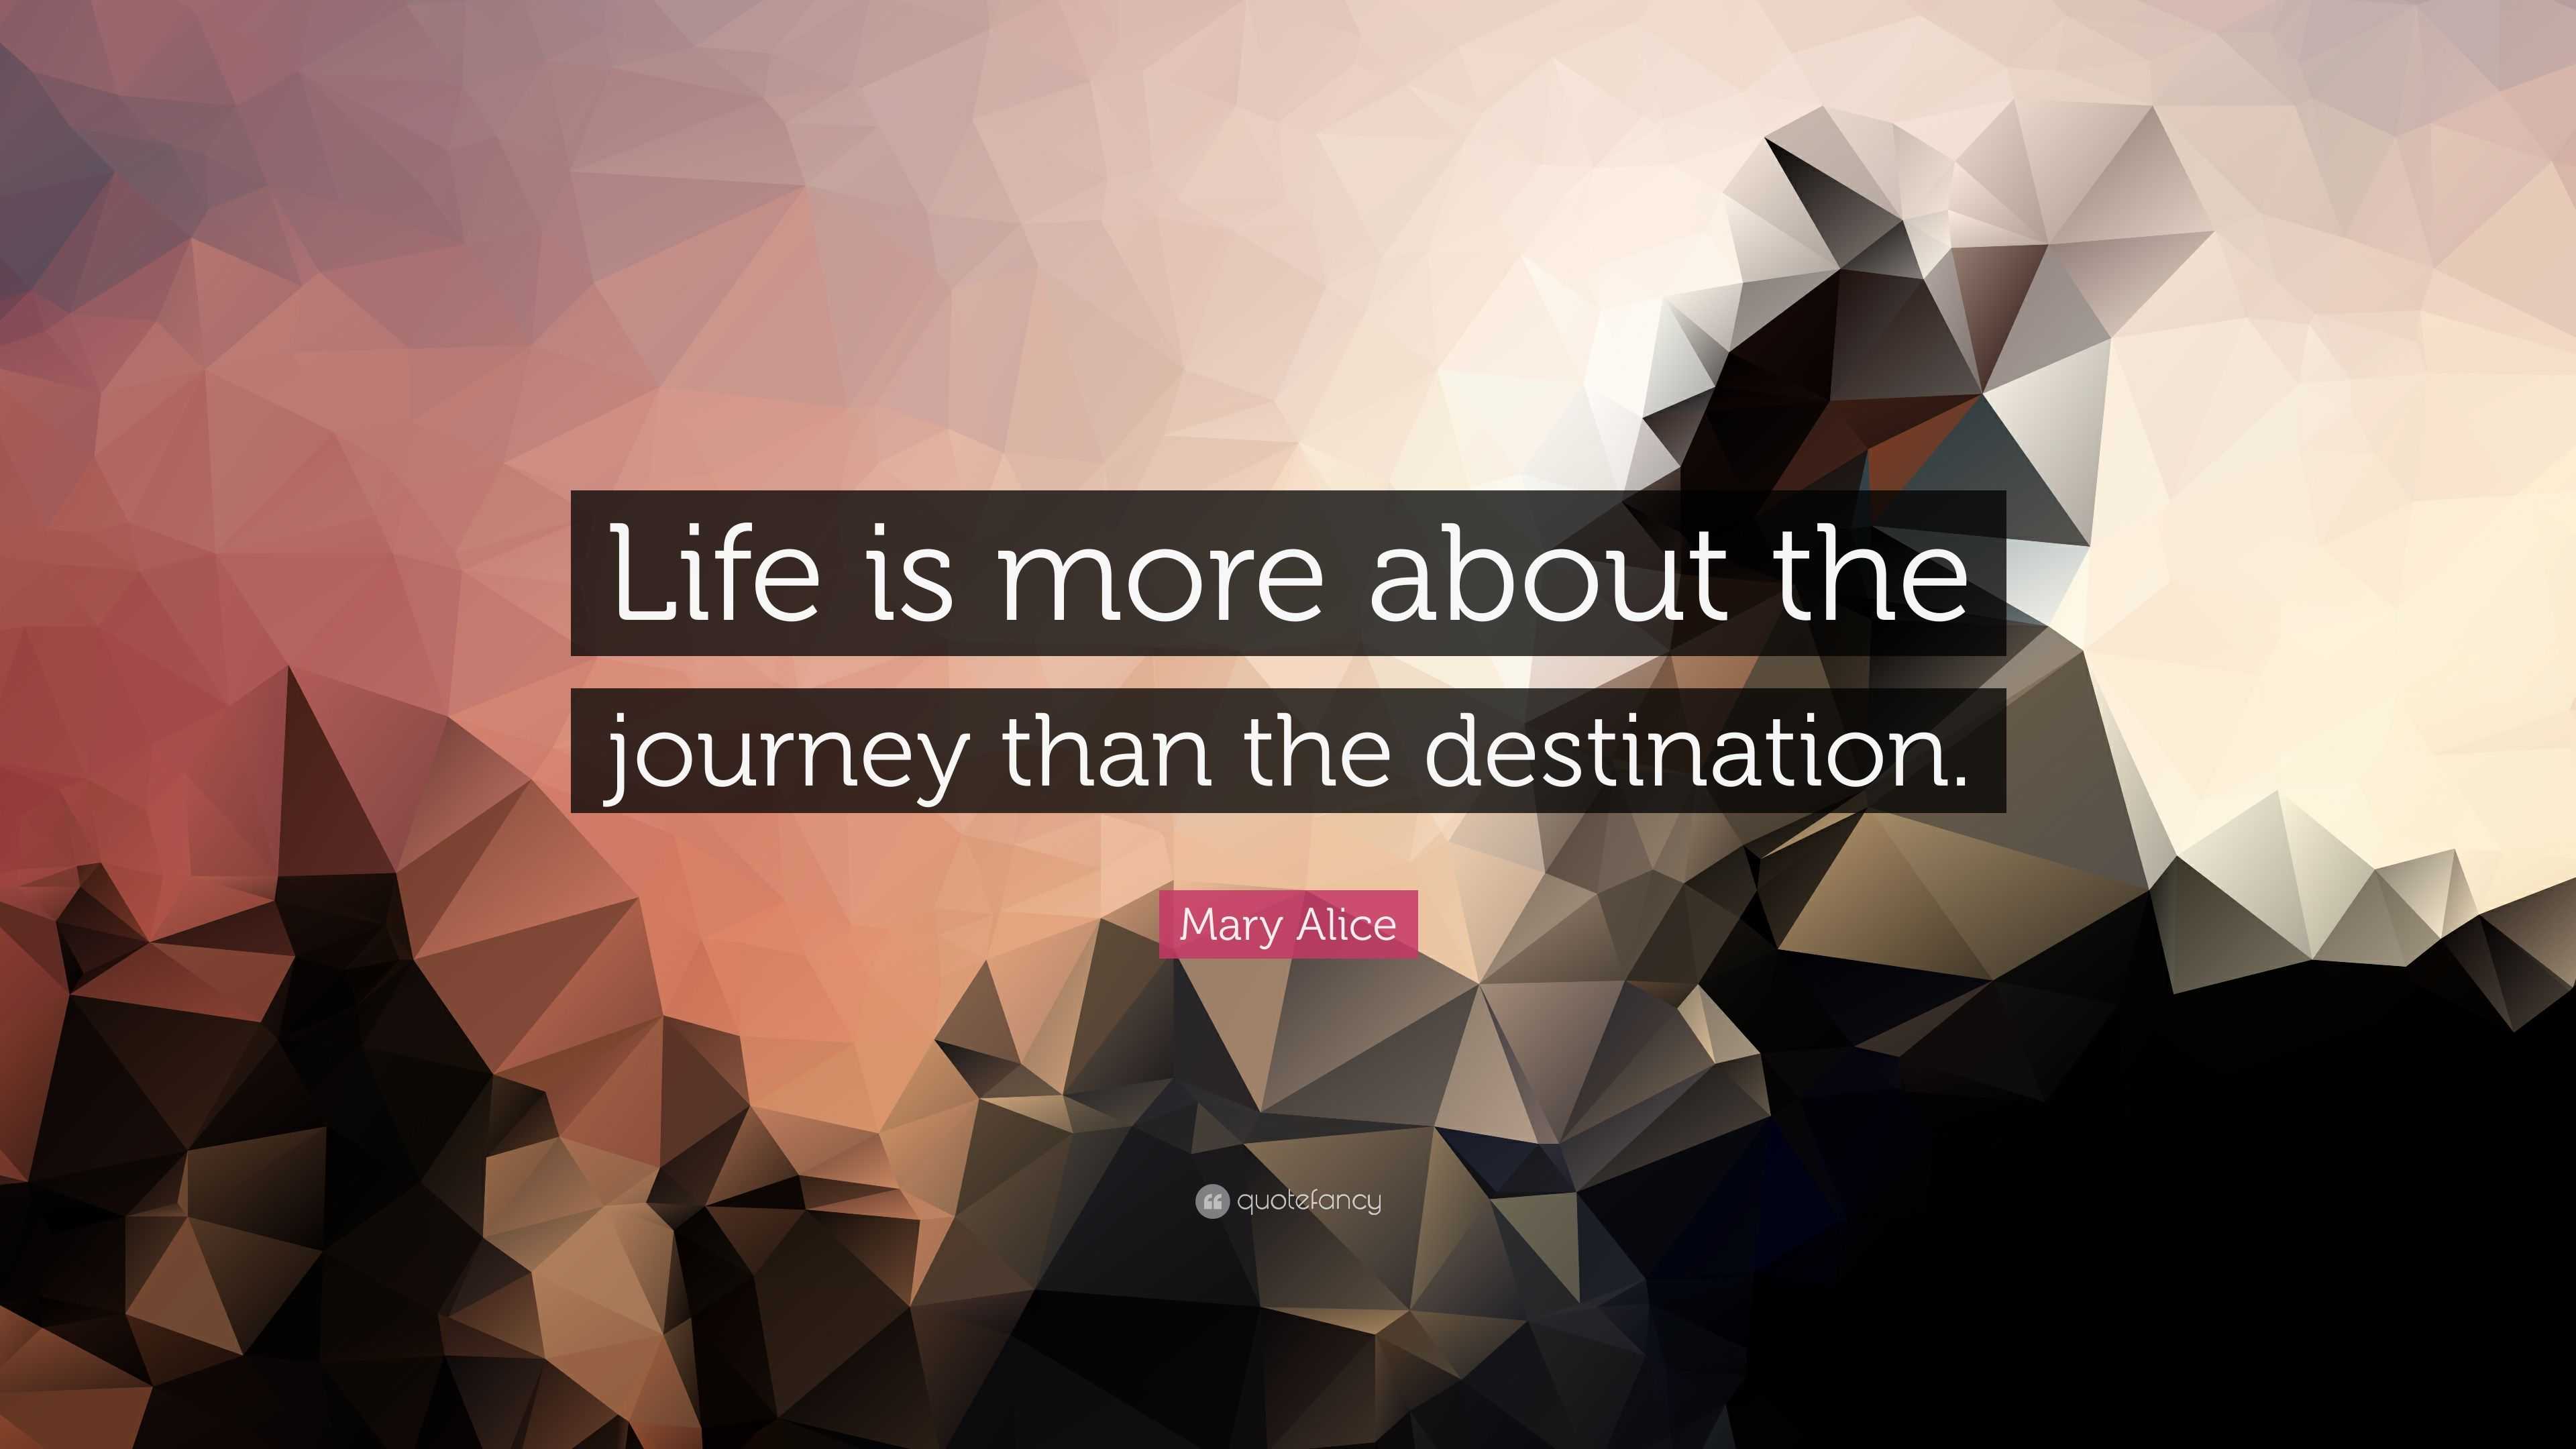 Mary Alice Quote: “Life is more about the journey than the destination.”